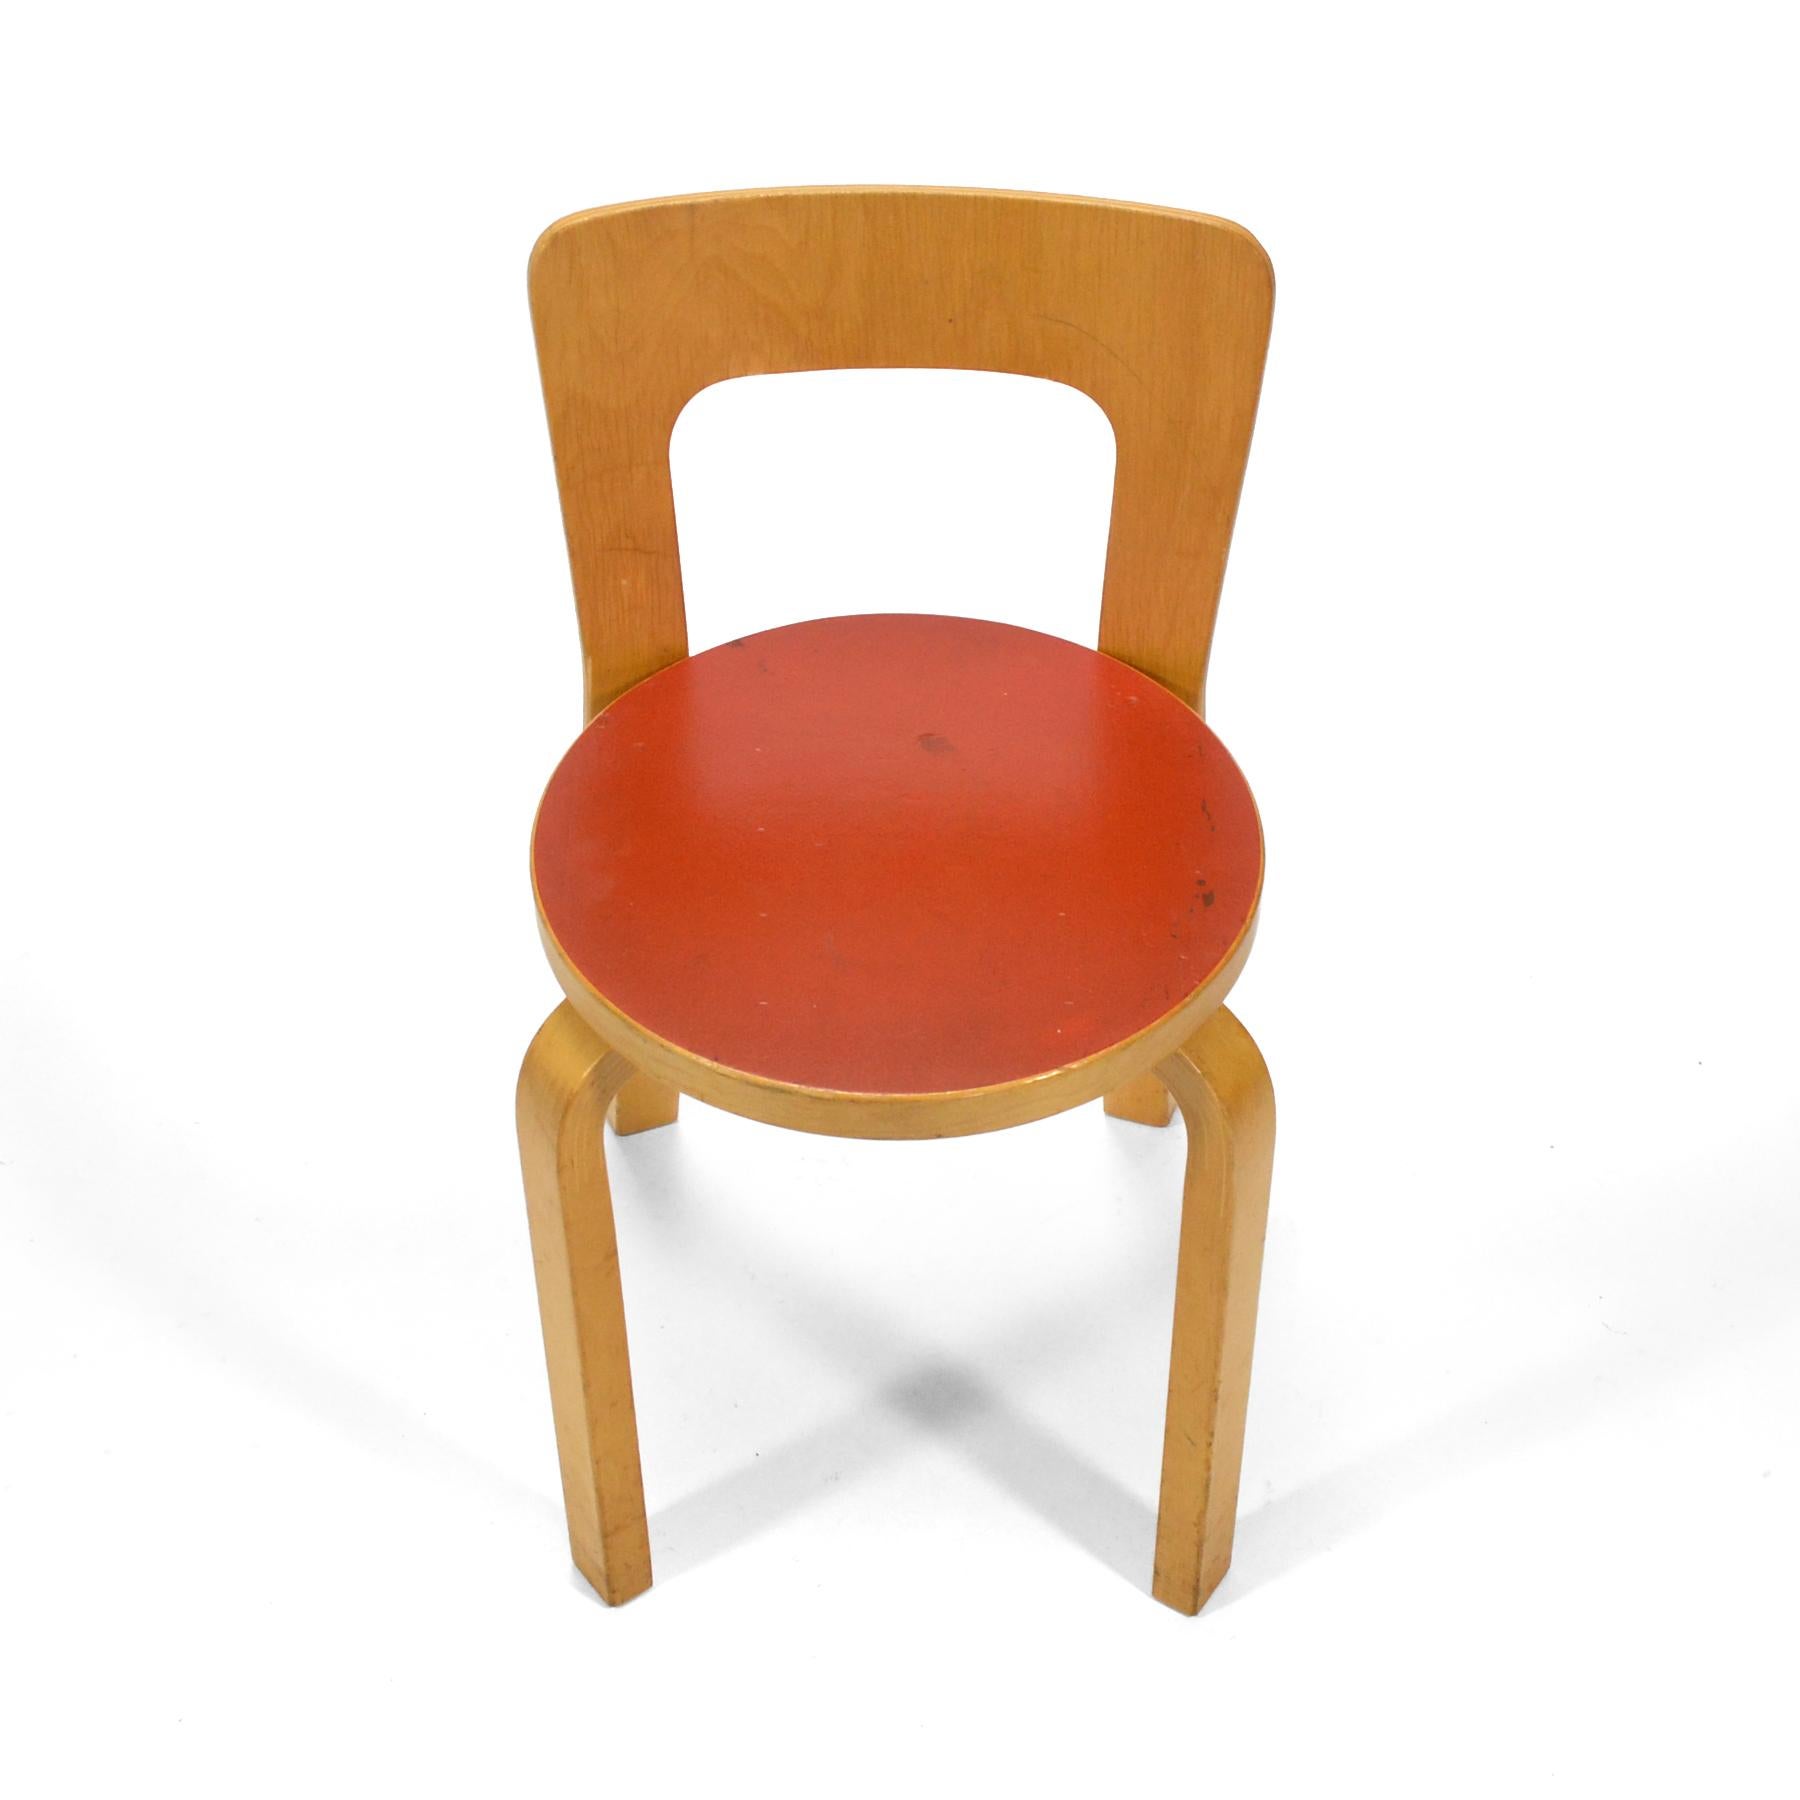 Mid-20th Century Alvar Aalto Model 65 Chair with Red Seat by Artek